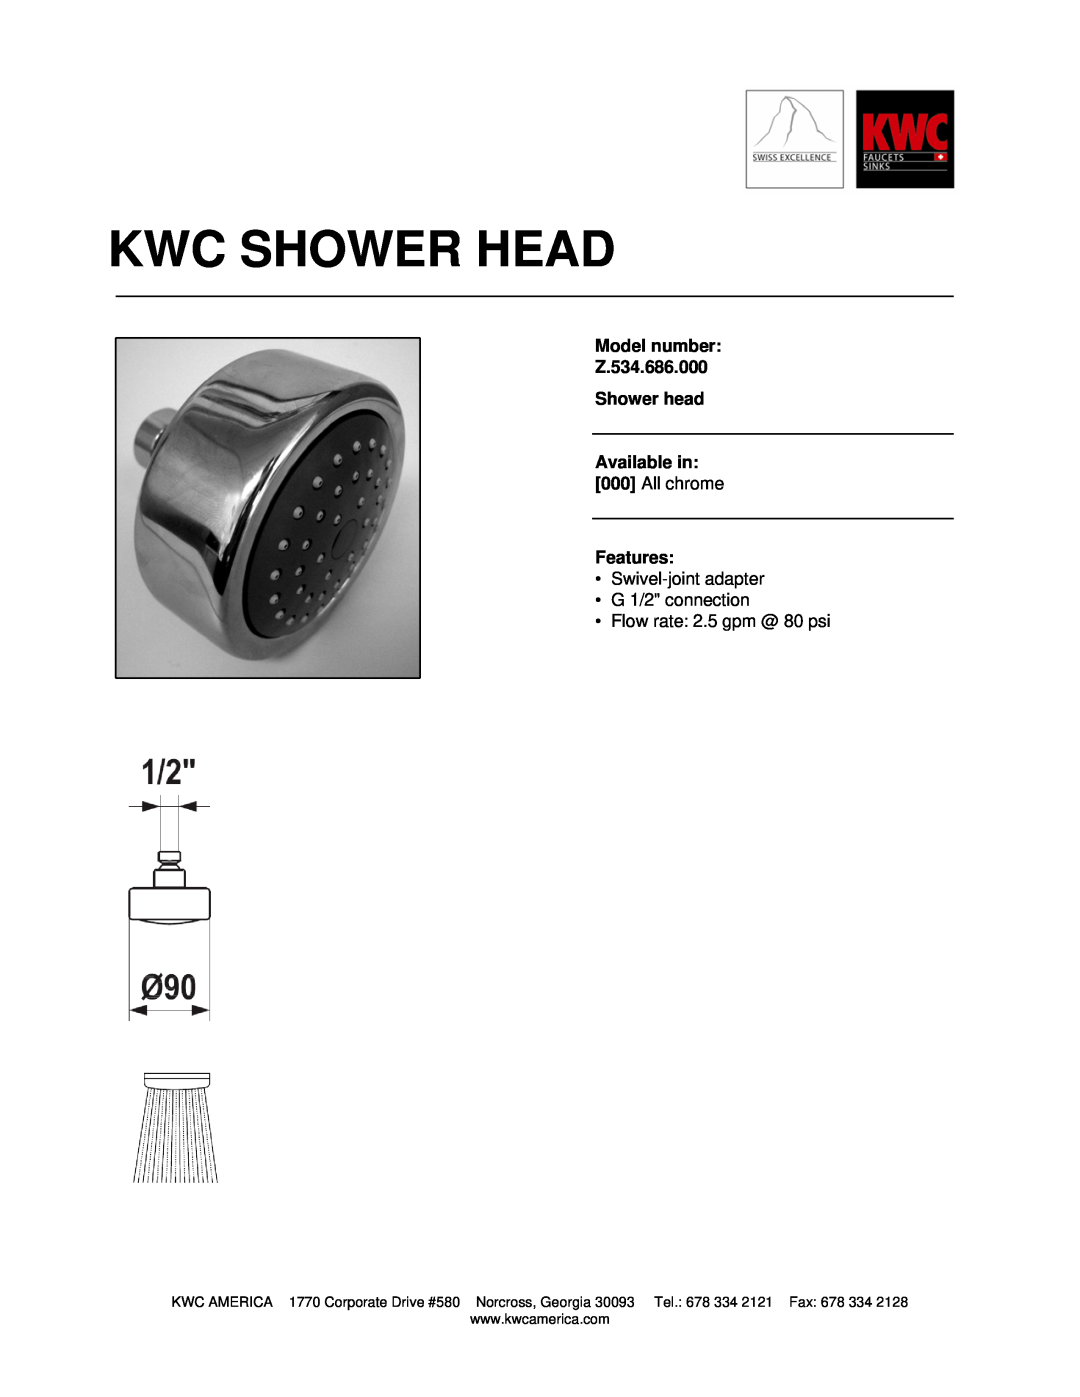 KWC manual Kwc Shower Head, Model number Z.534.686.000 Shower head, Available in 000 All chrome Features 